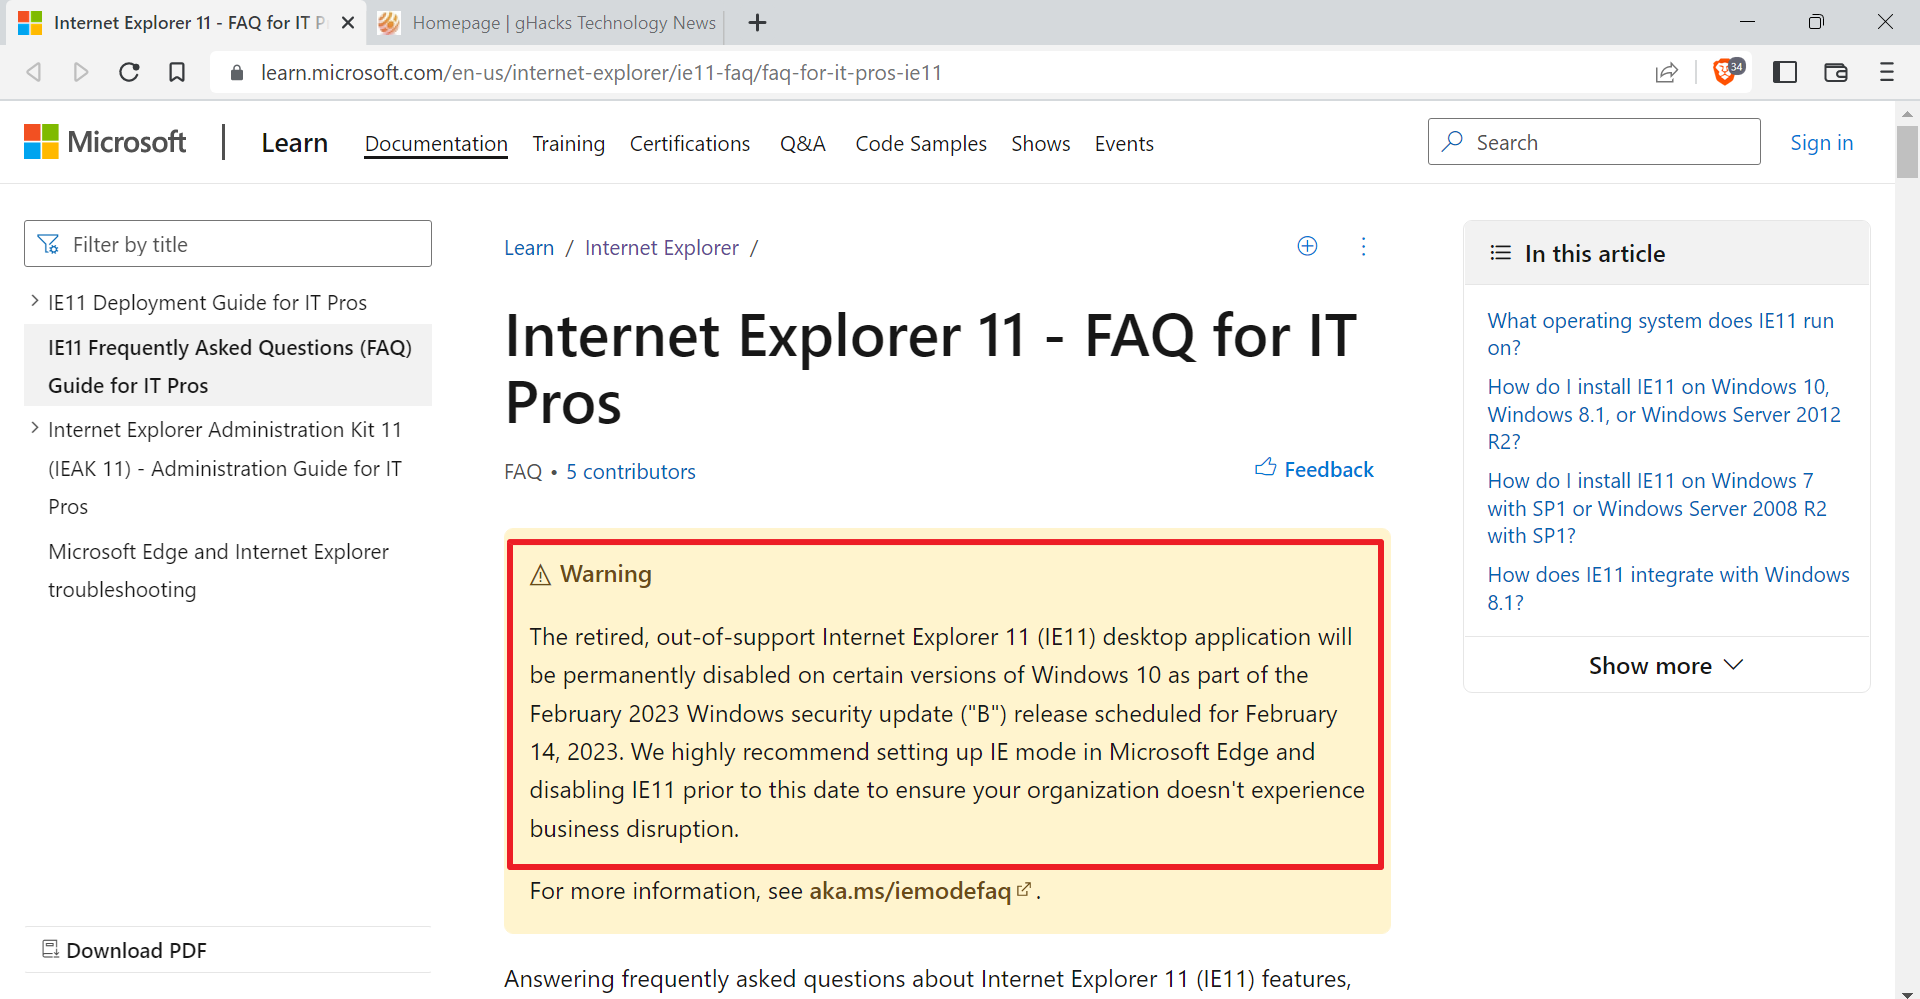 Still using Internet Explorer 11 on Windows 10?  It will be deactivated in February 2023